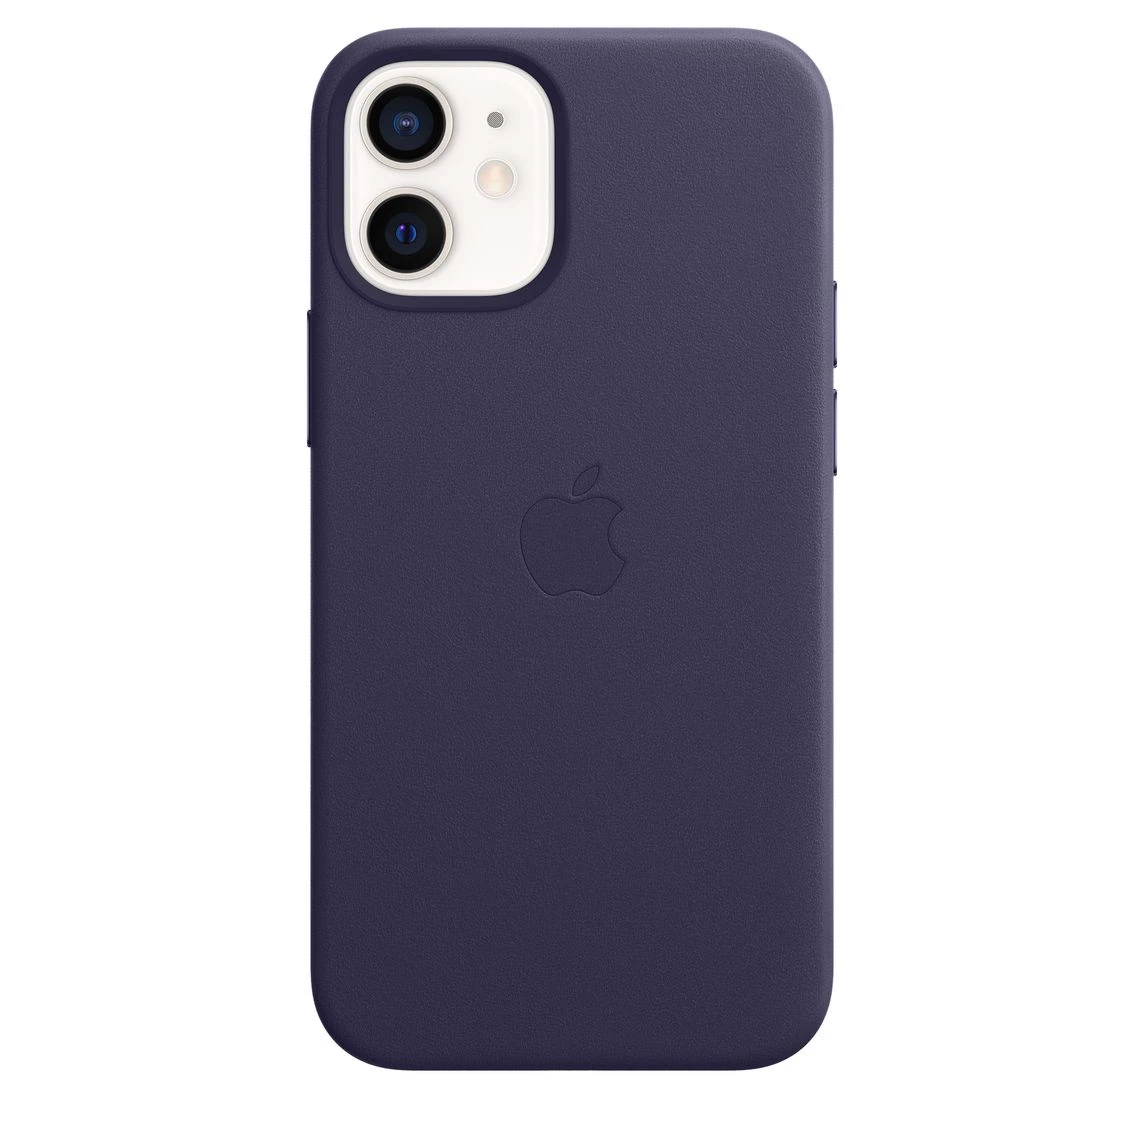 Apple iPhone 12 mini Leather Case with MagSafe - Deep Violet (MJYQ3)